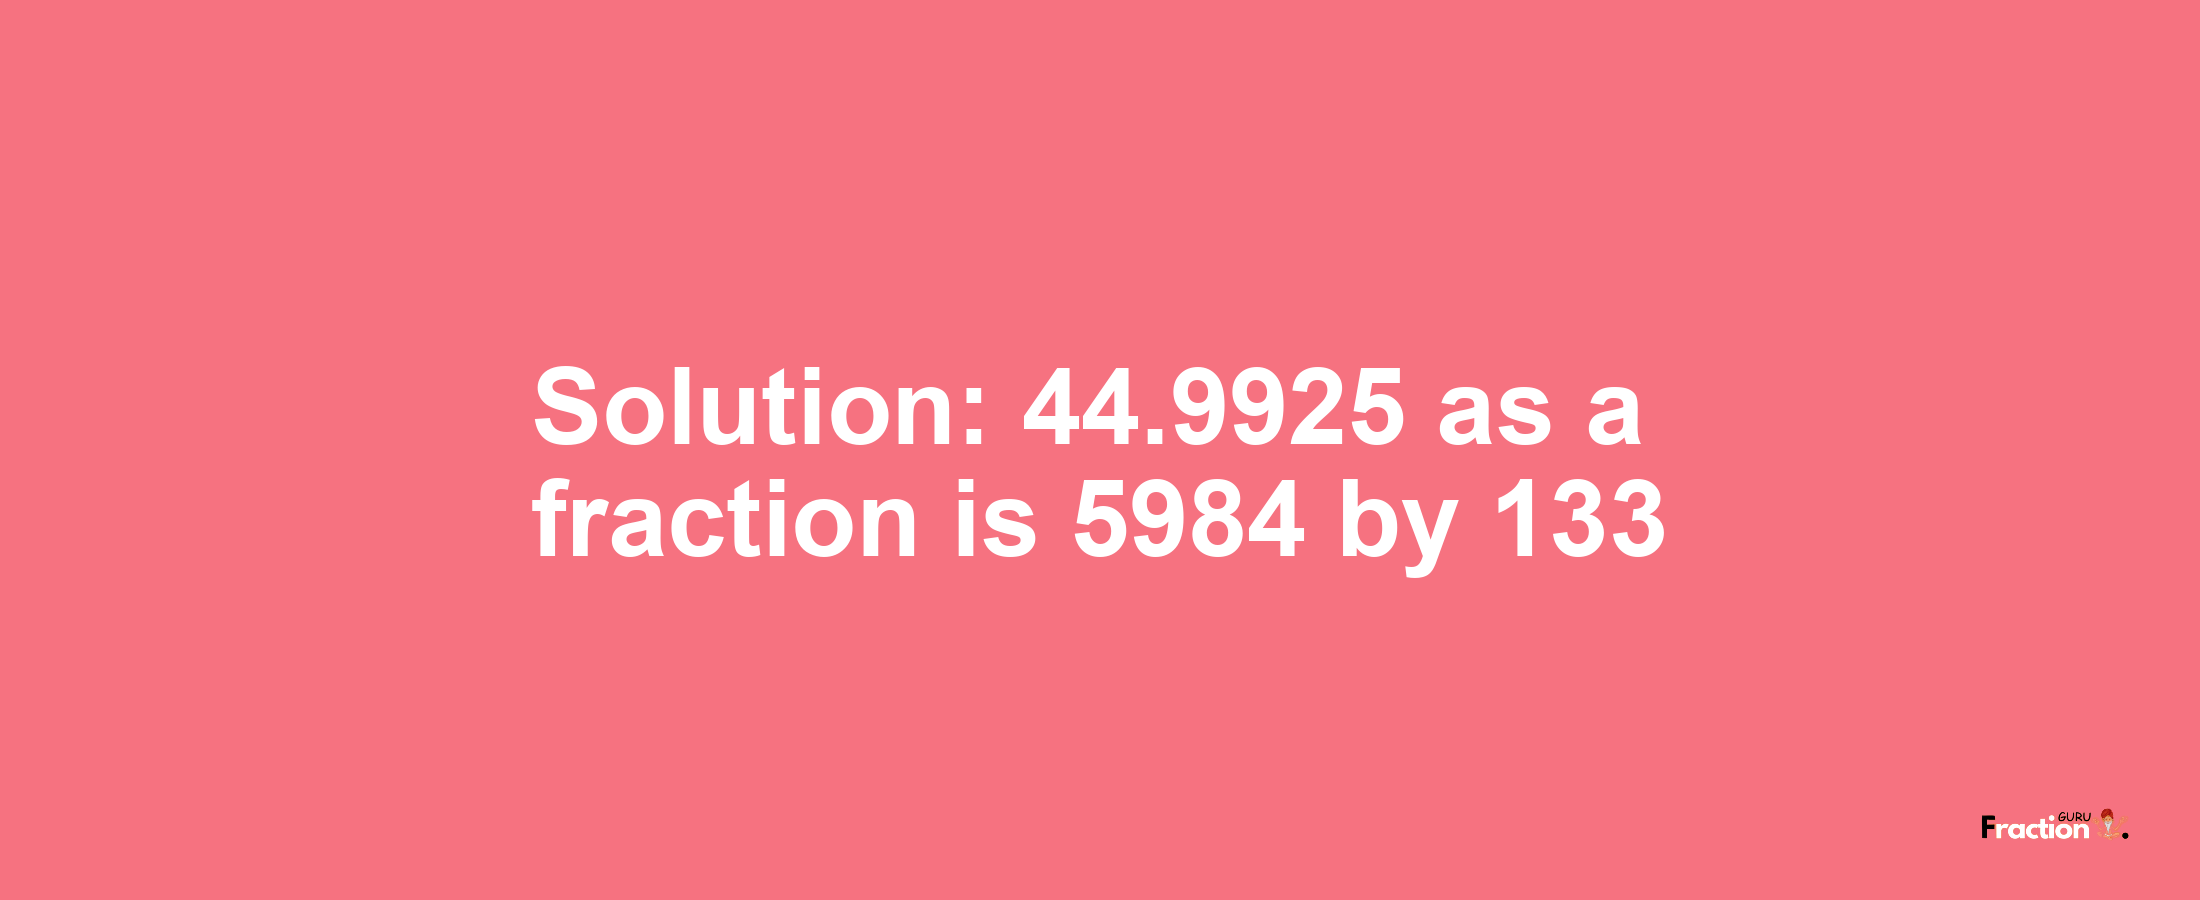 Solution:44.9925 as a fraction is 5984/133